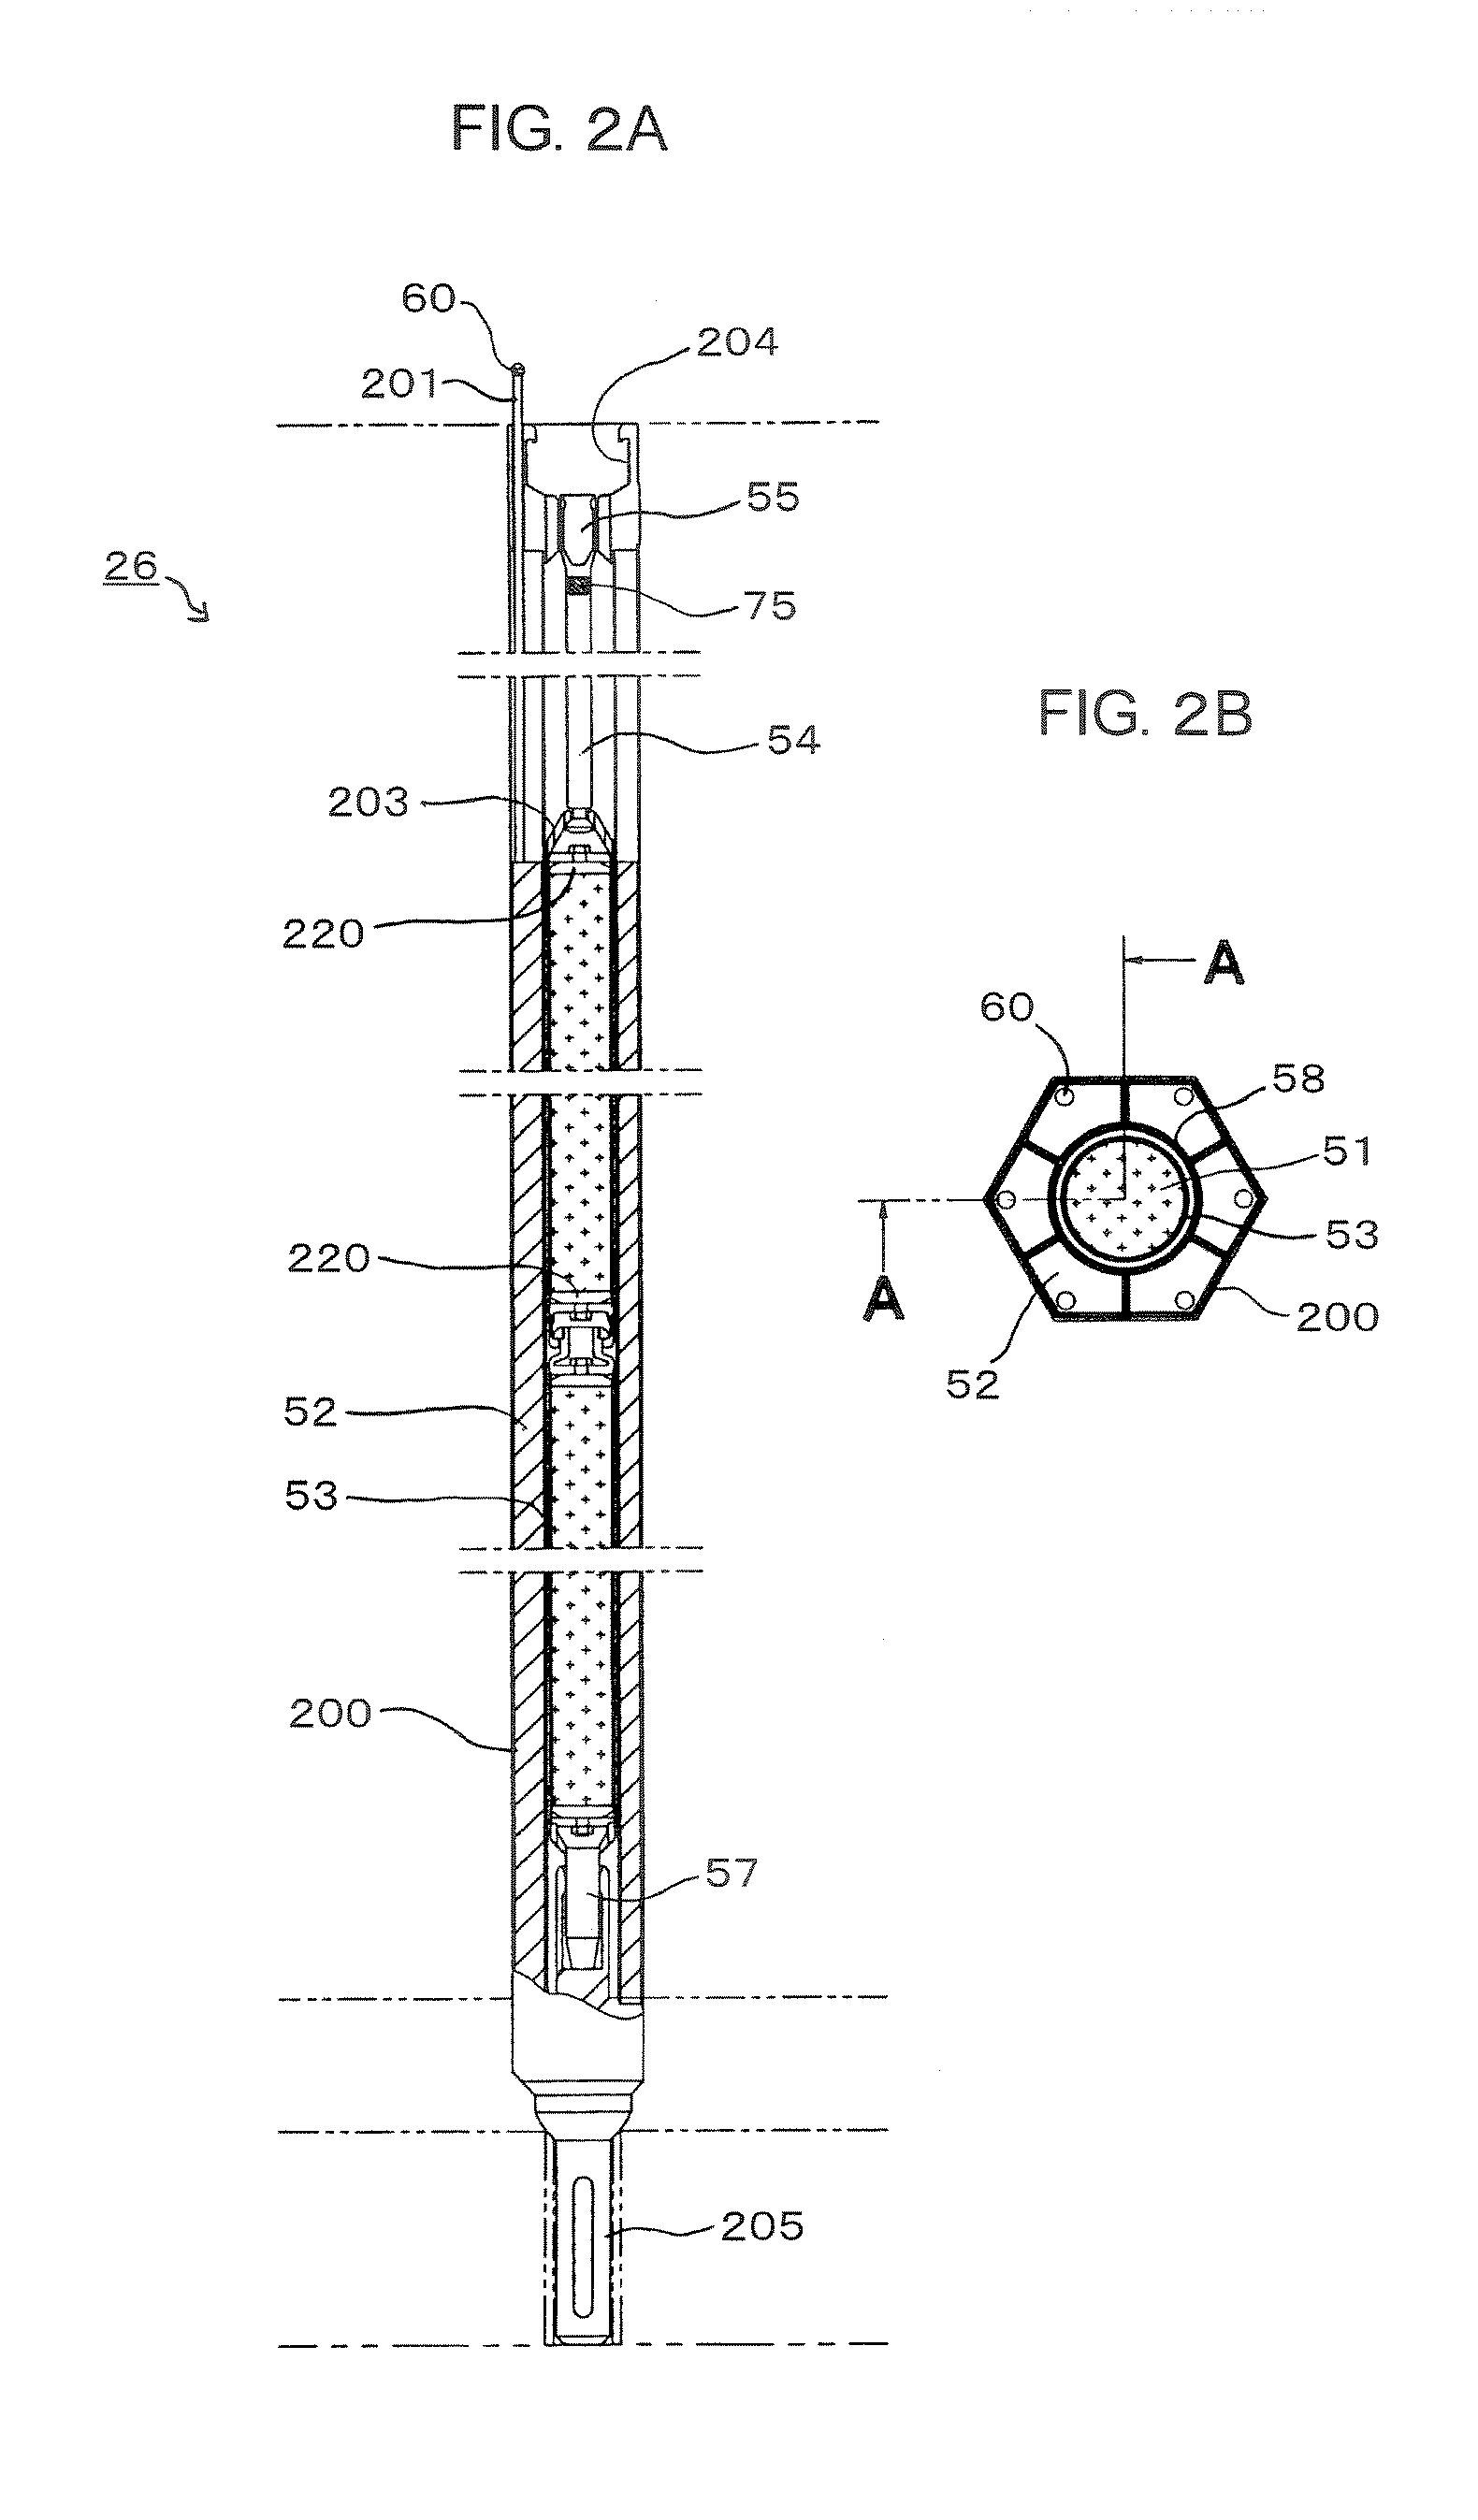 Reactivity controlling apparatus  and fast reactor